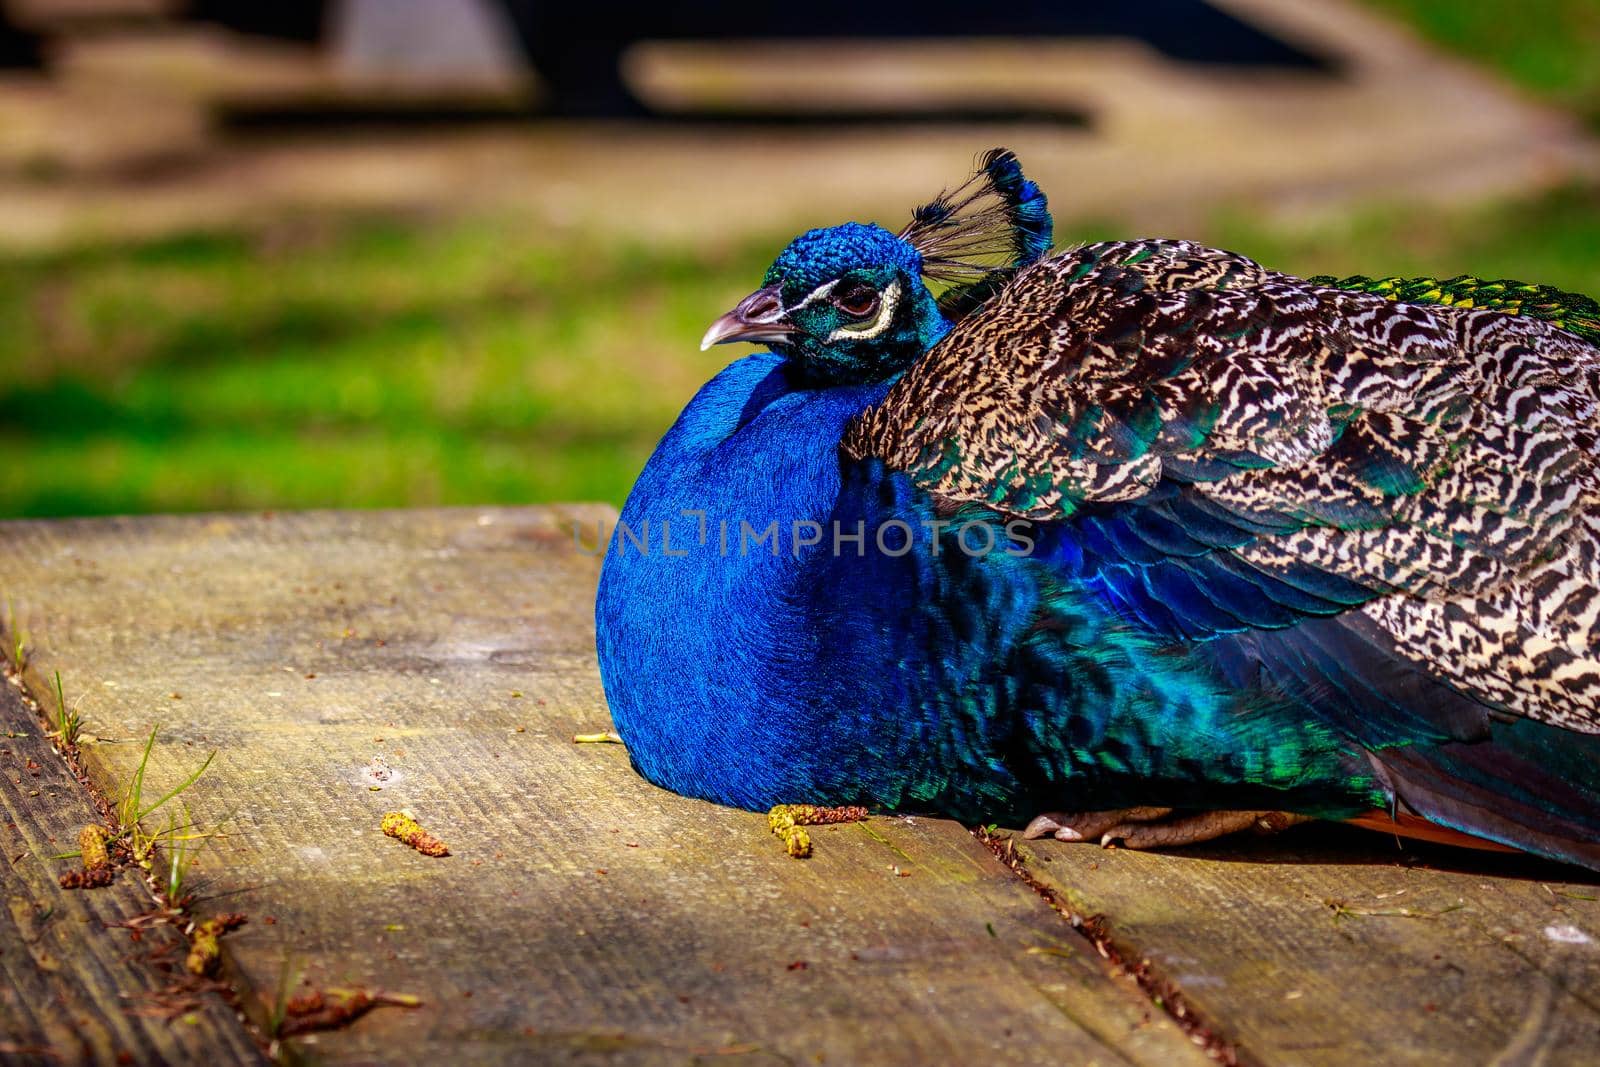 A blue indian peacock perches on a wooden picnic table.